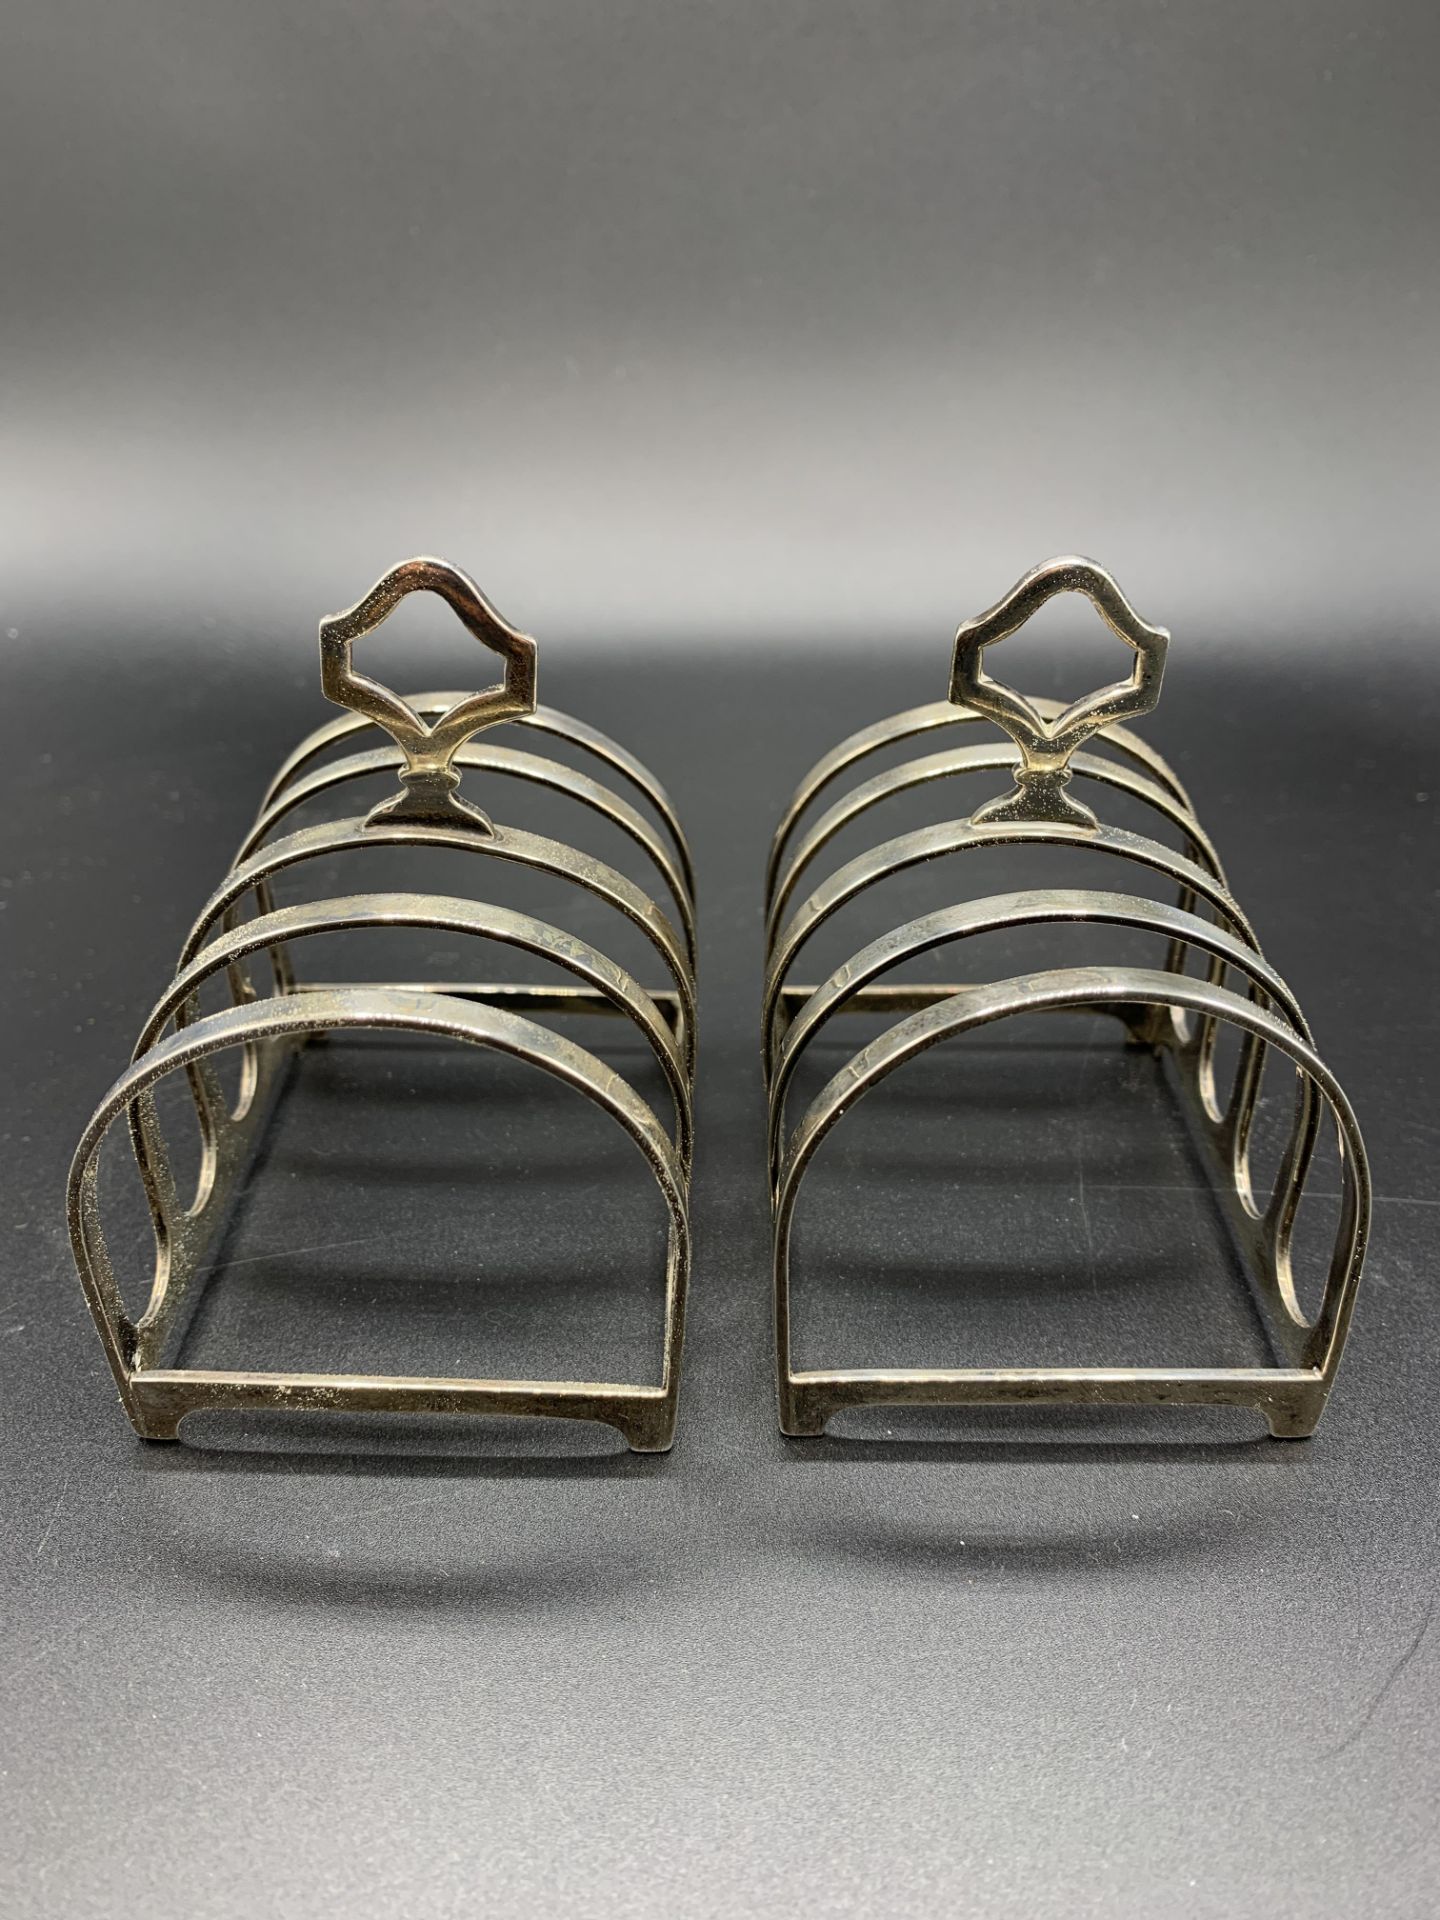 A pair of Mappin & Webb hallmarked silver toast racks - Image 2 of 4